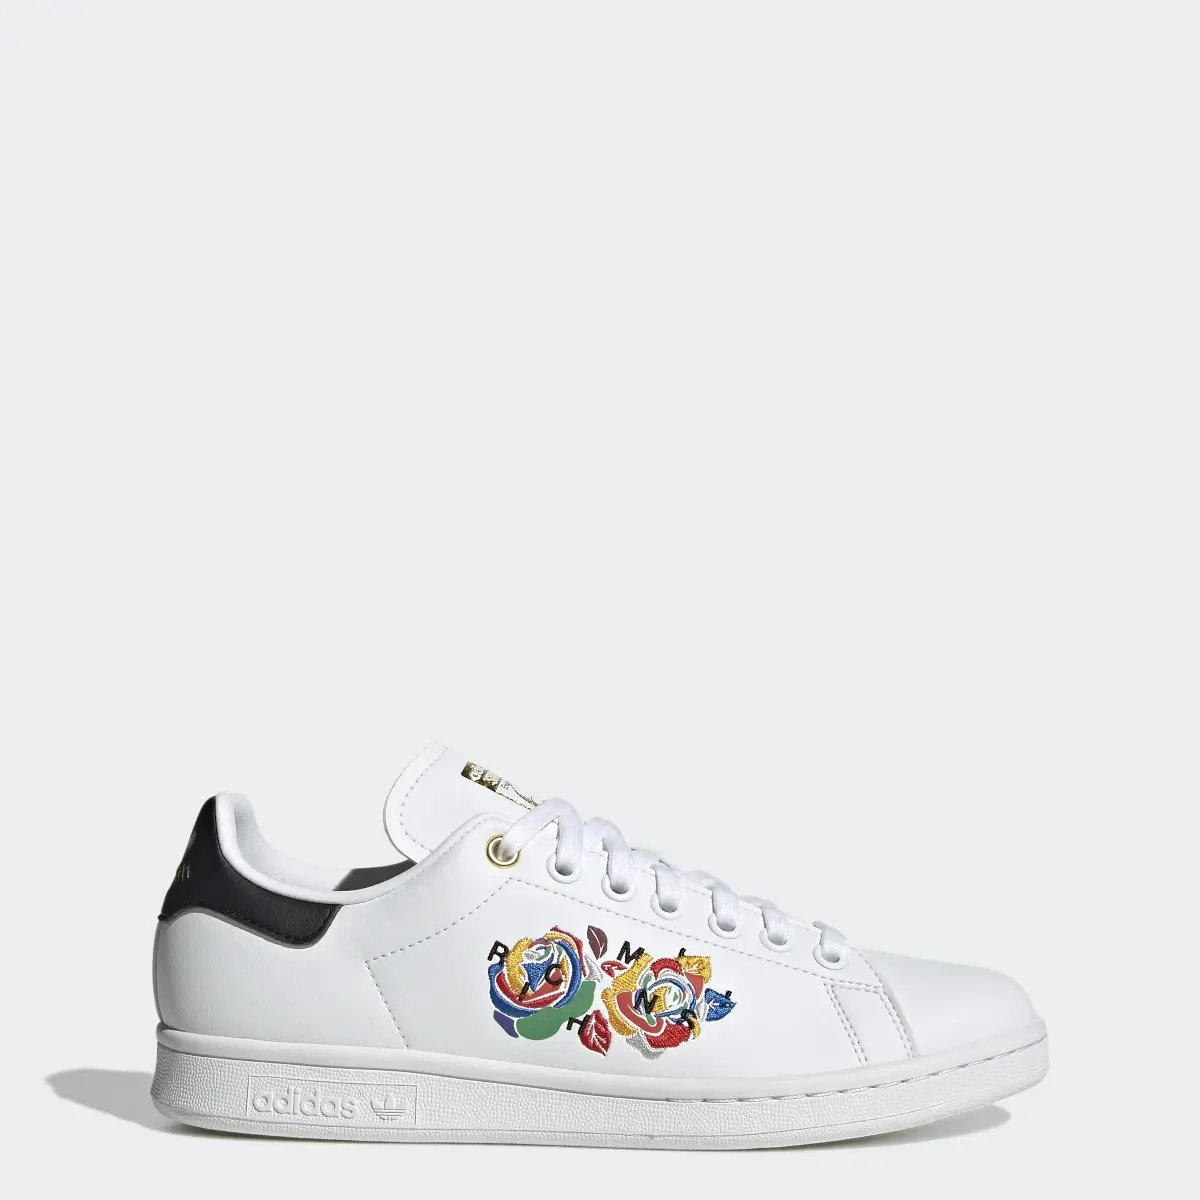 Adidas Rich Mnisi Stan Smith Shoes. 1